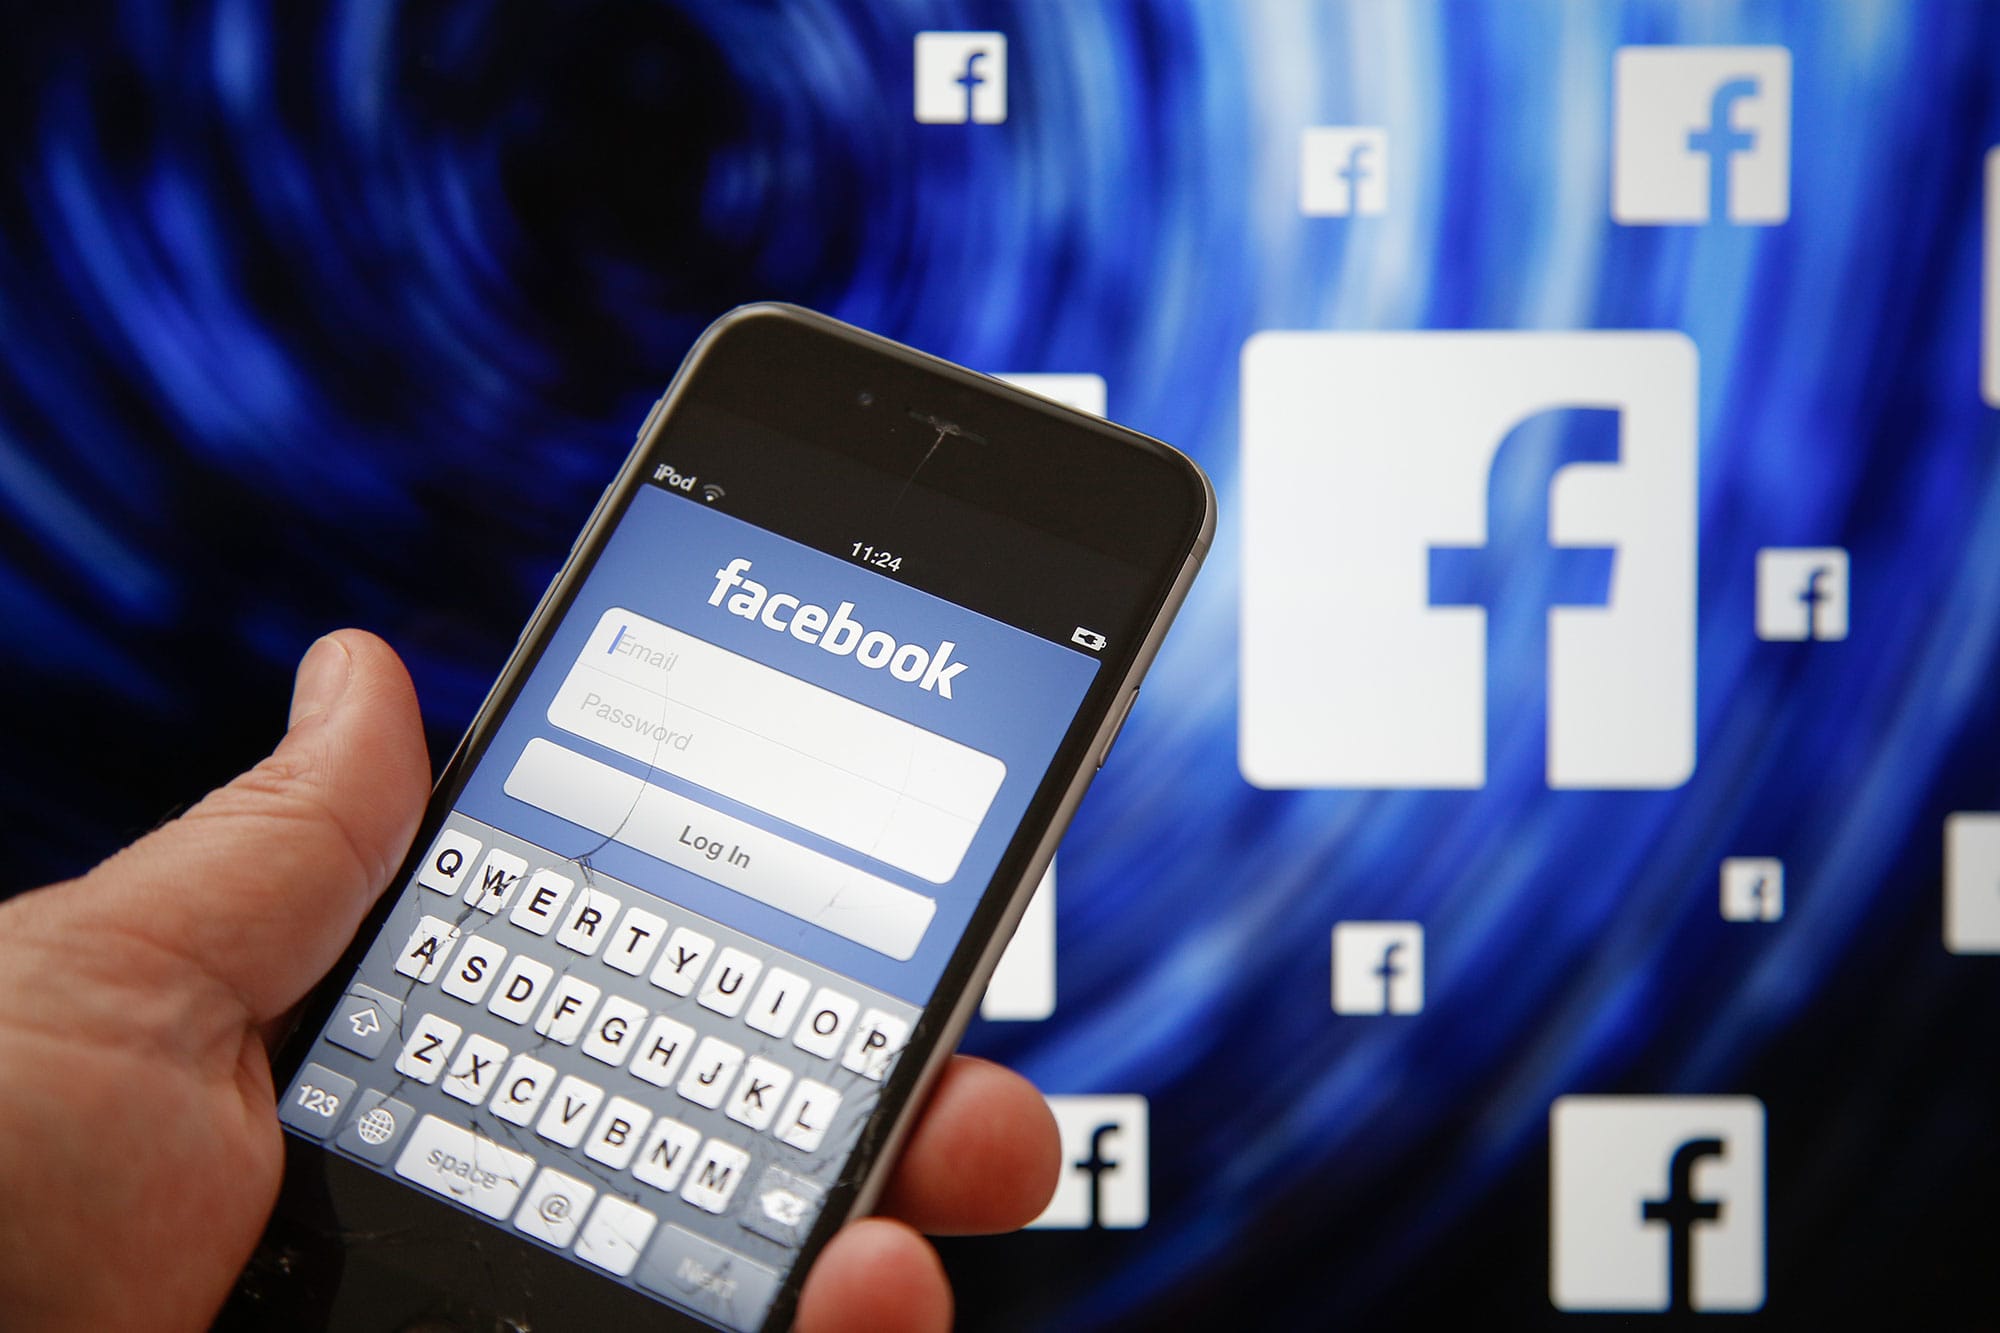 Facebook Login Update Makes It Harder For Apps To Spam Your Wall